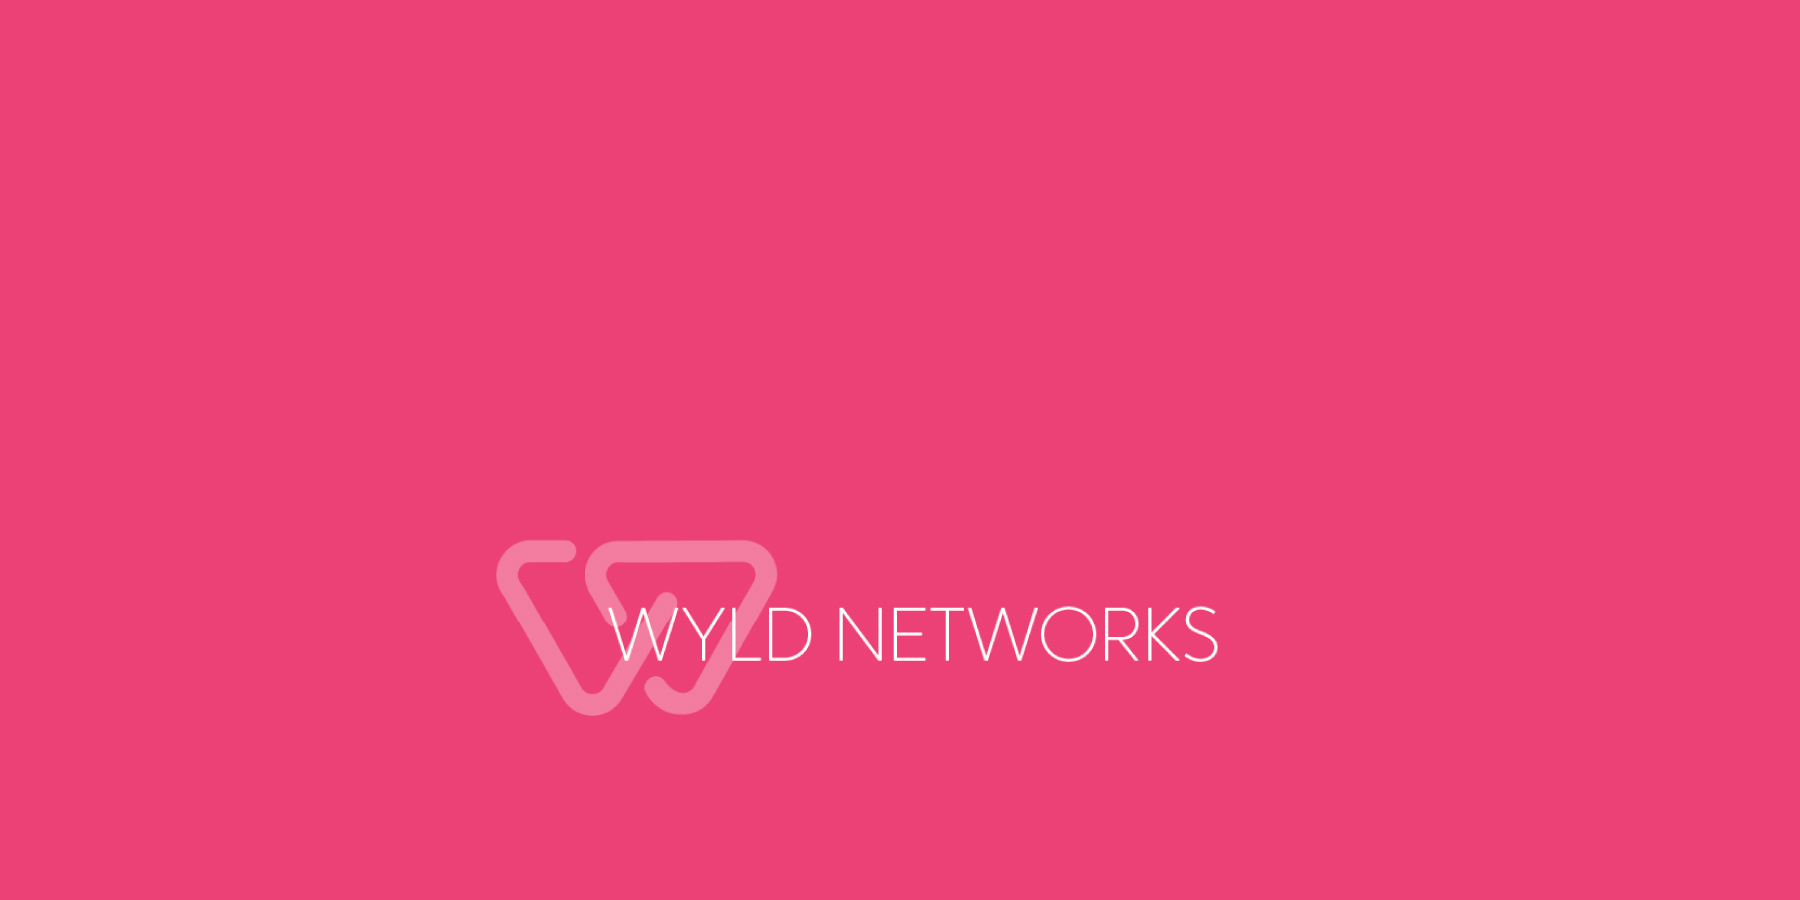 Wyld Networks: Corrected Mangold Insight Report